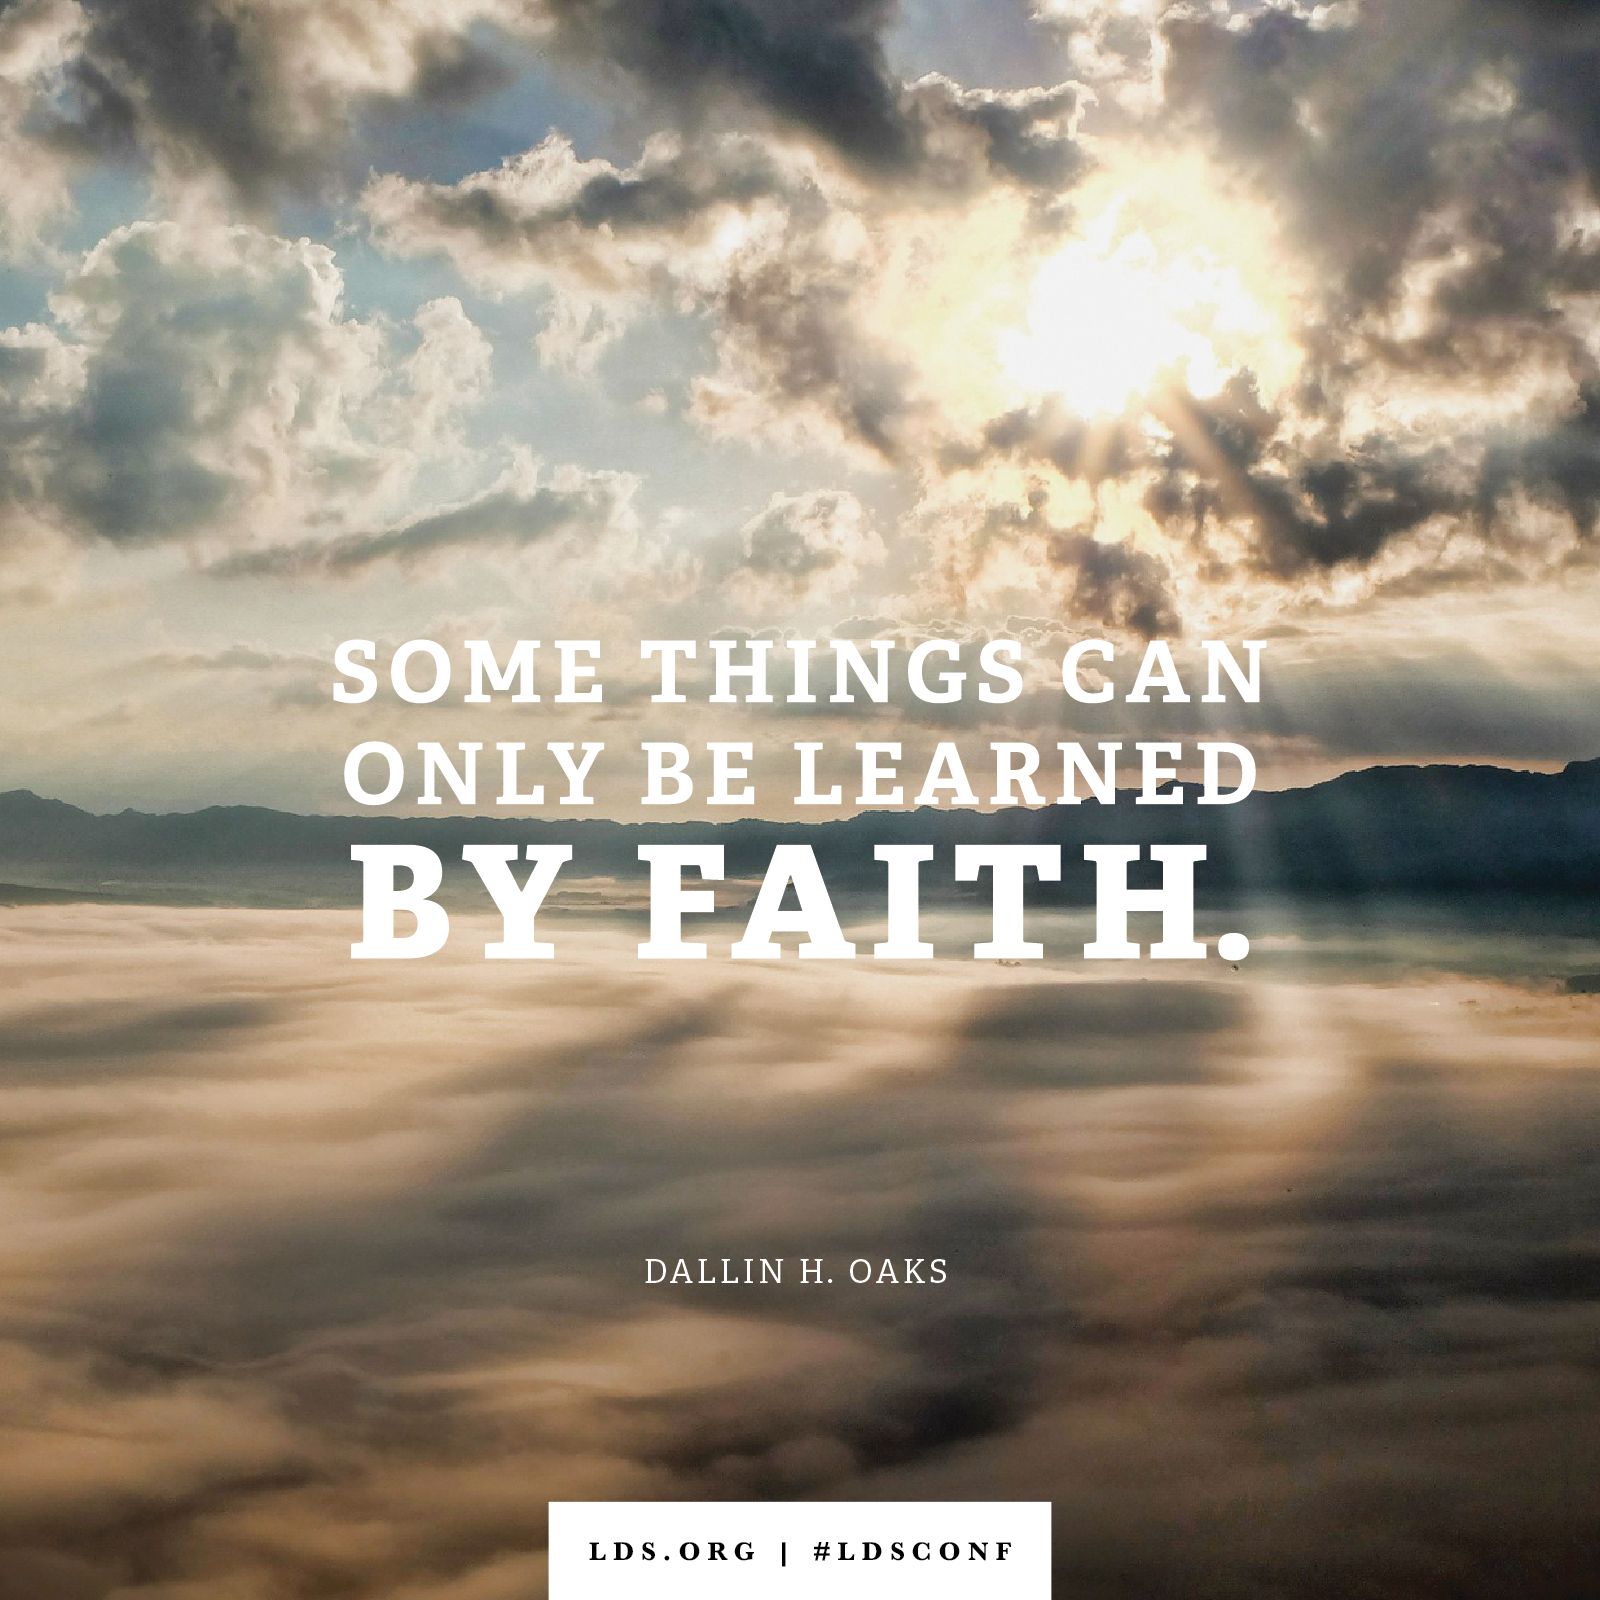 “Some things can only be learned by faith.” —Elder Dallin H. Oaks, “Opposition in All Things”